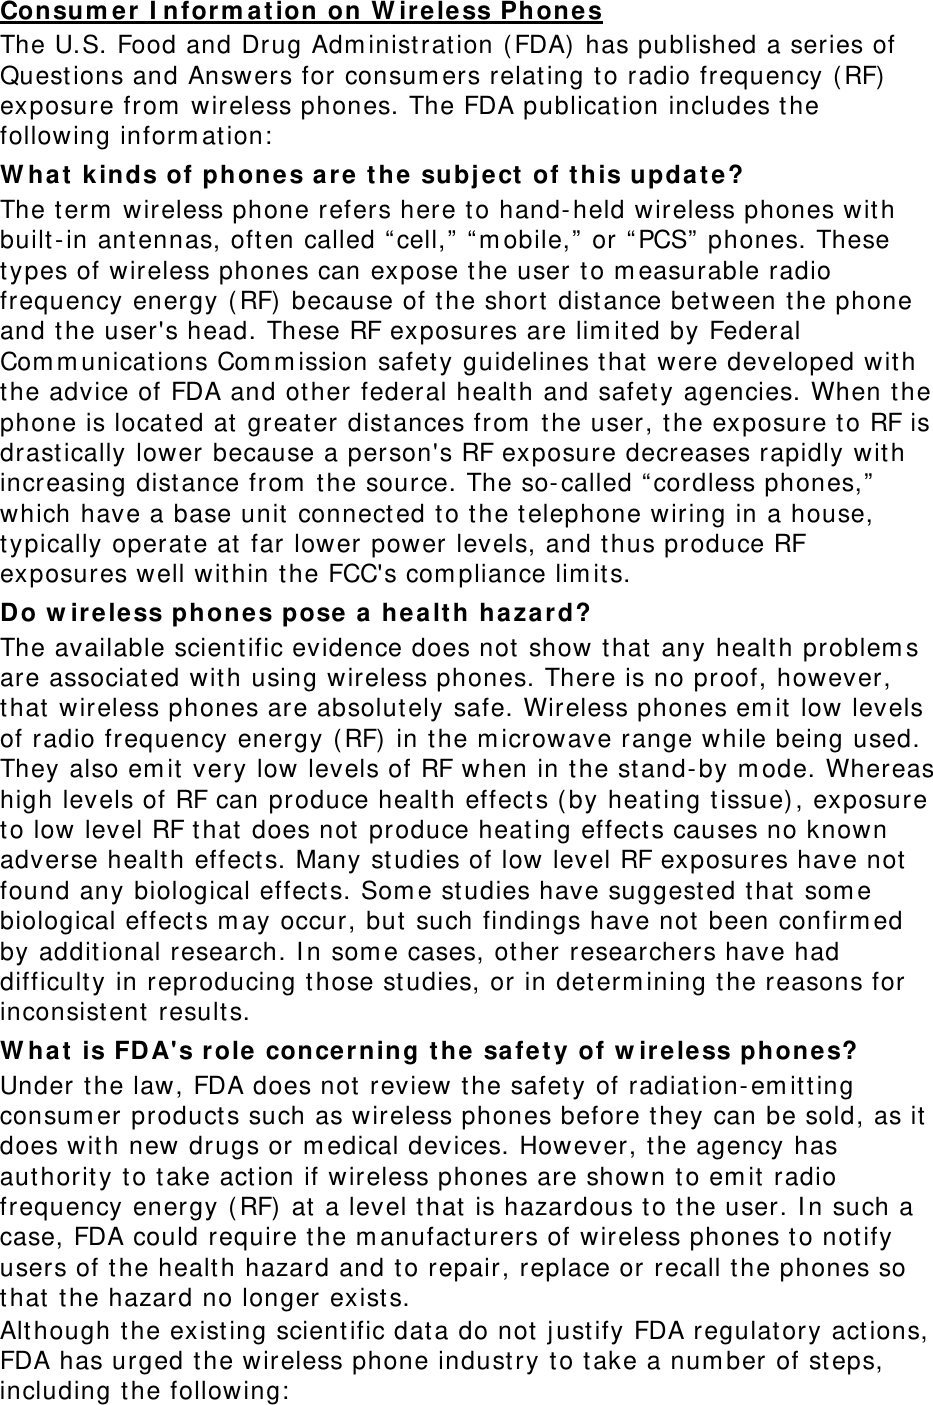 Consum er I nfor m a t ion on W ir ele ss Phones The U.S. Food and Drug Adm inistration ( FDA)  has published a series of Quest ions and Answers for consum ers relating t o radio frequency ( RF)  exposure from  wireless phones. The FDA publication includes the following inform ation:  W hat  kinds of phone s are  the subj ect of t his upda t e? The t erm  wireless phone refers here t o hand- held wireless phones wit h built-in ant ennas, often called “ cell,”  “ m obile,”  or “ PCS” phones. These types of wireless phones can expose t he user to m easurable radio frequency energy ( RF) because of t he short  dist ance between t he phone and the user&apos;s head. These RF exposures are lim ited by Federal Com m unicat ions Com m ission safet y guidelines that  were developed wit h the advice of FDA and other federal healt h and safet y agencies. When t he phone is locat ed at greater distances from  the user, t he exposure to RF is drast ically lower because a person&apos;s RF exposure decreases rapidly with increasing dist ance from  the source. The so- called “ cordless phones,”  which have a base unit connect ed to t he telephone wiring in a house, typically operate at far lower power levels, and thus produce RF exposures well wit hin the FCC&apos;s com pliance lim its. Do w ir ele ss phone s pose a hea lt h hazard? The available scient ific evidence does not show t hat any health problem s are associat ed wit h using wireless phones. There is no proof, however, that  wireless phones are absolut ely safe. Wireless phones em it low levels of radio frequency energy ( RF)  in t he m icrowave range while being used. They also em it very low levels of RF when in t he stand- by m ode. Whereas high levels of RF can produce health effect s ( by heating t issue) , exposure to low level RF that does not produce heating effect s causes no known adverse health effect s. Many studies of low level RF exposures have not found any biological effect s. Som e st udies have suggest ed t hat som e biological effect s m ay occur, but  such findings have not been confirm ed by additional research. I n som e cases, other researchers have had difficulty in reproducing t hose studies, or in det erm ining the reasons for inconsist ent results. W hat  is FDA&apos;s r ole  concer ning t he  safe ty of w ir ele ss phone s? Under the law, FDA does not review the safet y of radiation- em itting consum er products such as wireless phones before they can be sold, as it does with new drugs or m edical devices. However, t he agency has aut hority t o t ake act ion if wireless phones are shown t o em it  radio frequency energy ( RF) at  a level that  is hazardous t o t he user. I n such a case, FDA could require the m anufact urers of wireless phones t o notify users of the health hazard and to repair, replace or recall t he phones so that  t he hazard no longer exist s. Alt hough t he existing scient ific data do not j ust ify FDA regulat ory act ions, FDA has urged the wireless phone industry to t ake a num ber of st eps, including t he following:  